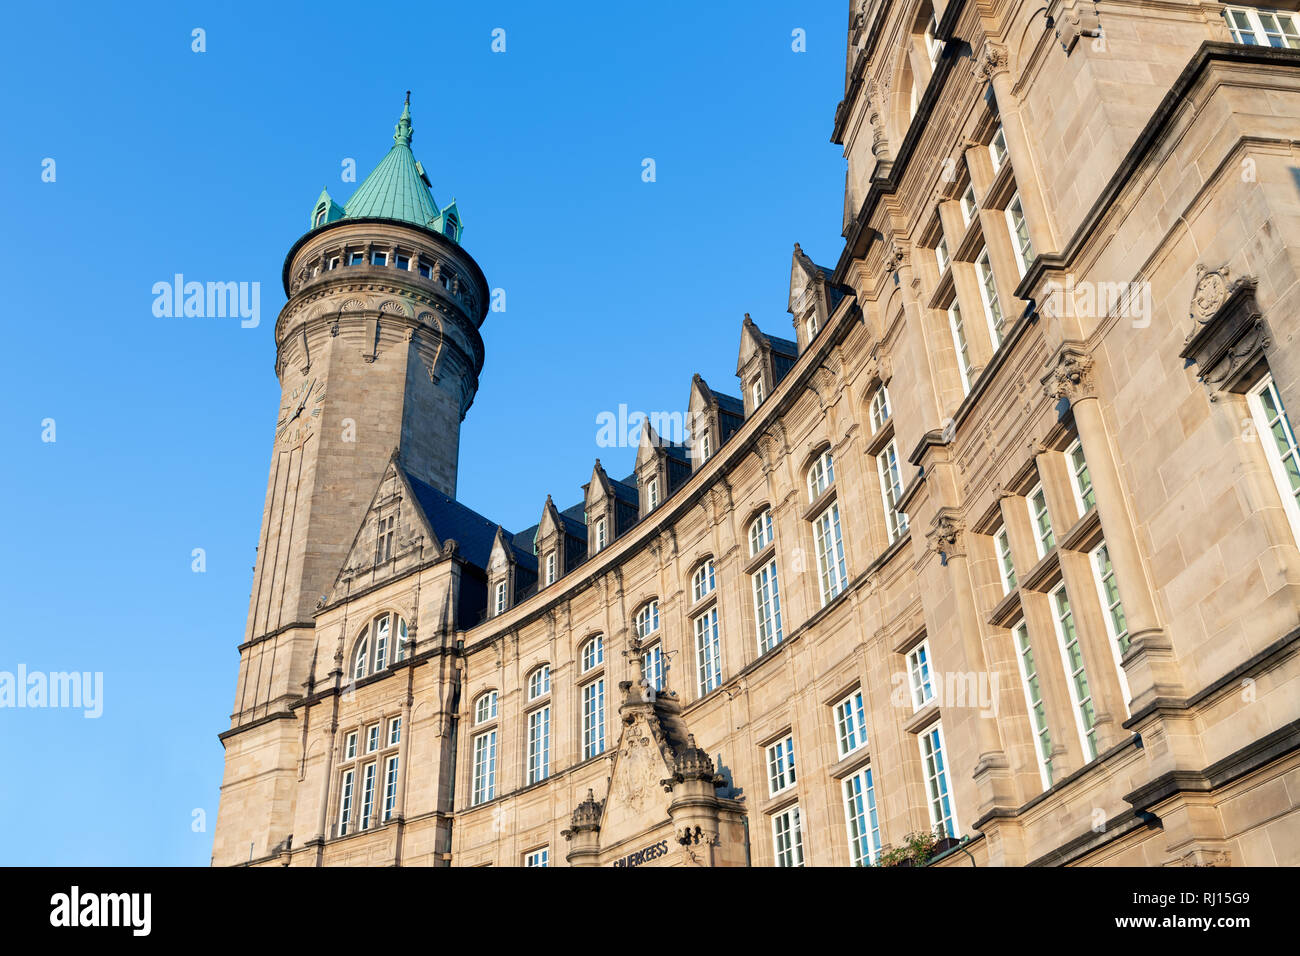 Spuerkeess BCEE bank with clock tower in Luxembourg city Stock Photo - Alamy